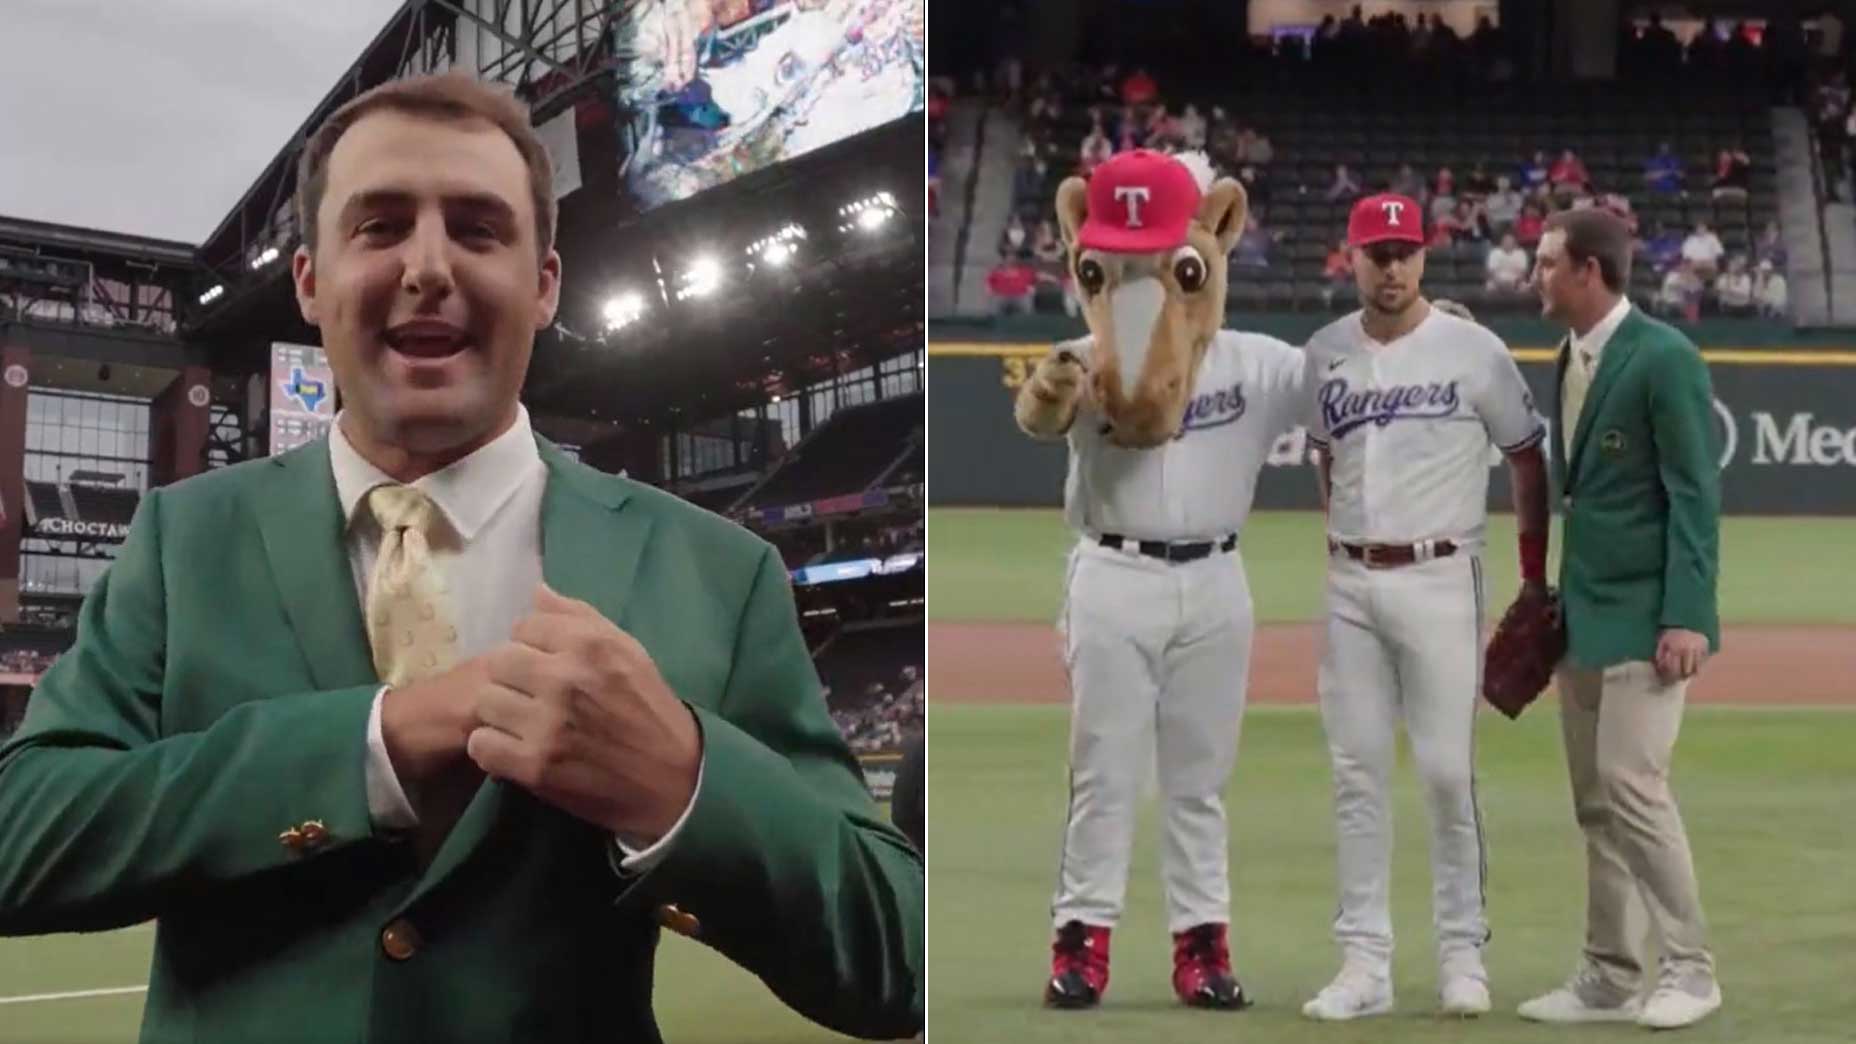 Scottie Scheffler in a green jacket throws out the first pitch at a Texas Rangers game